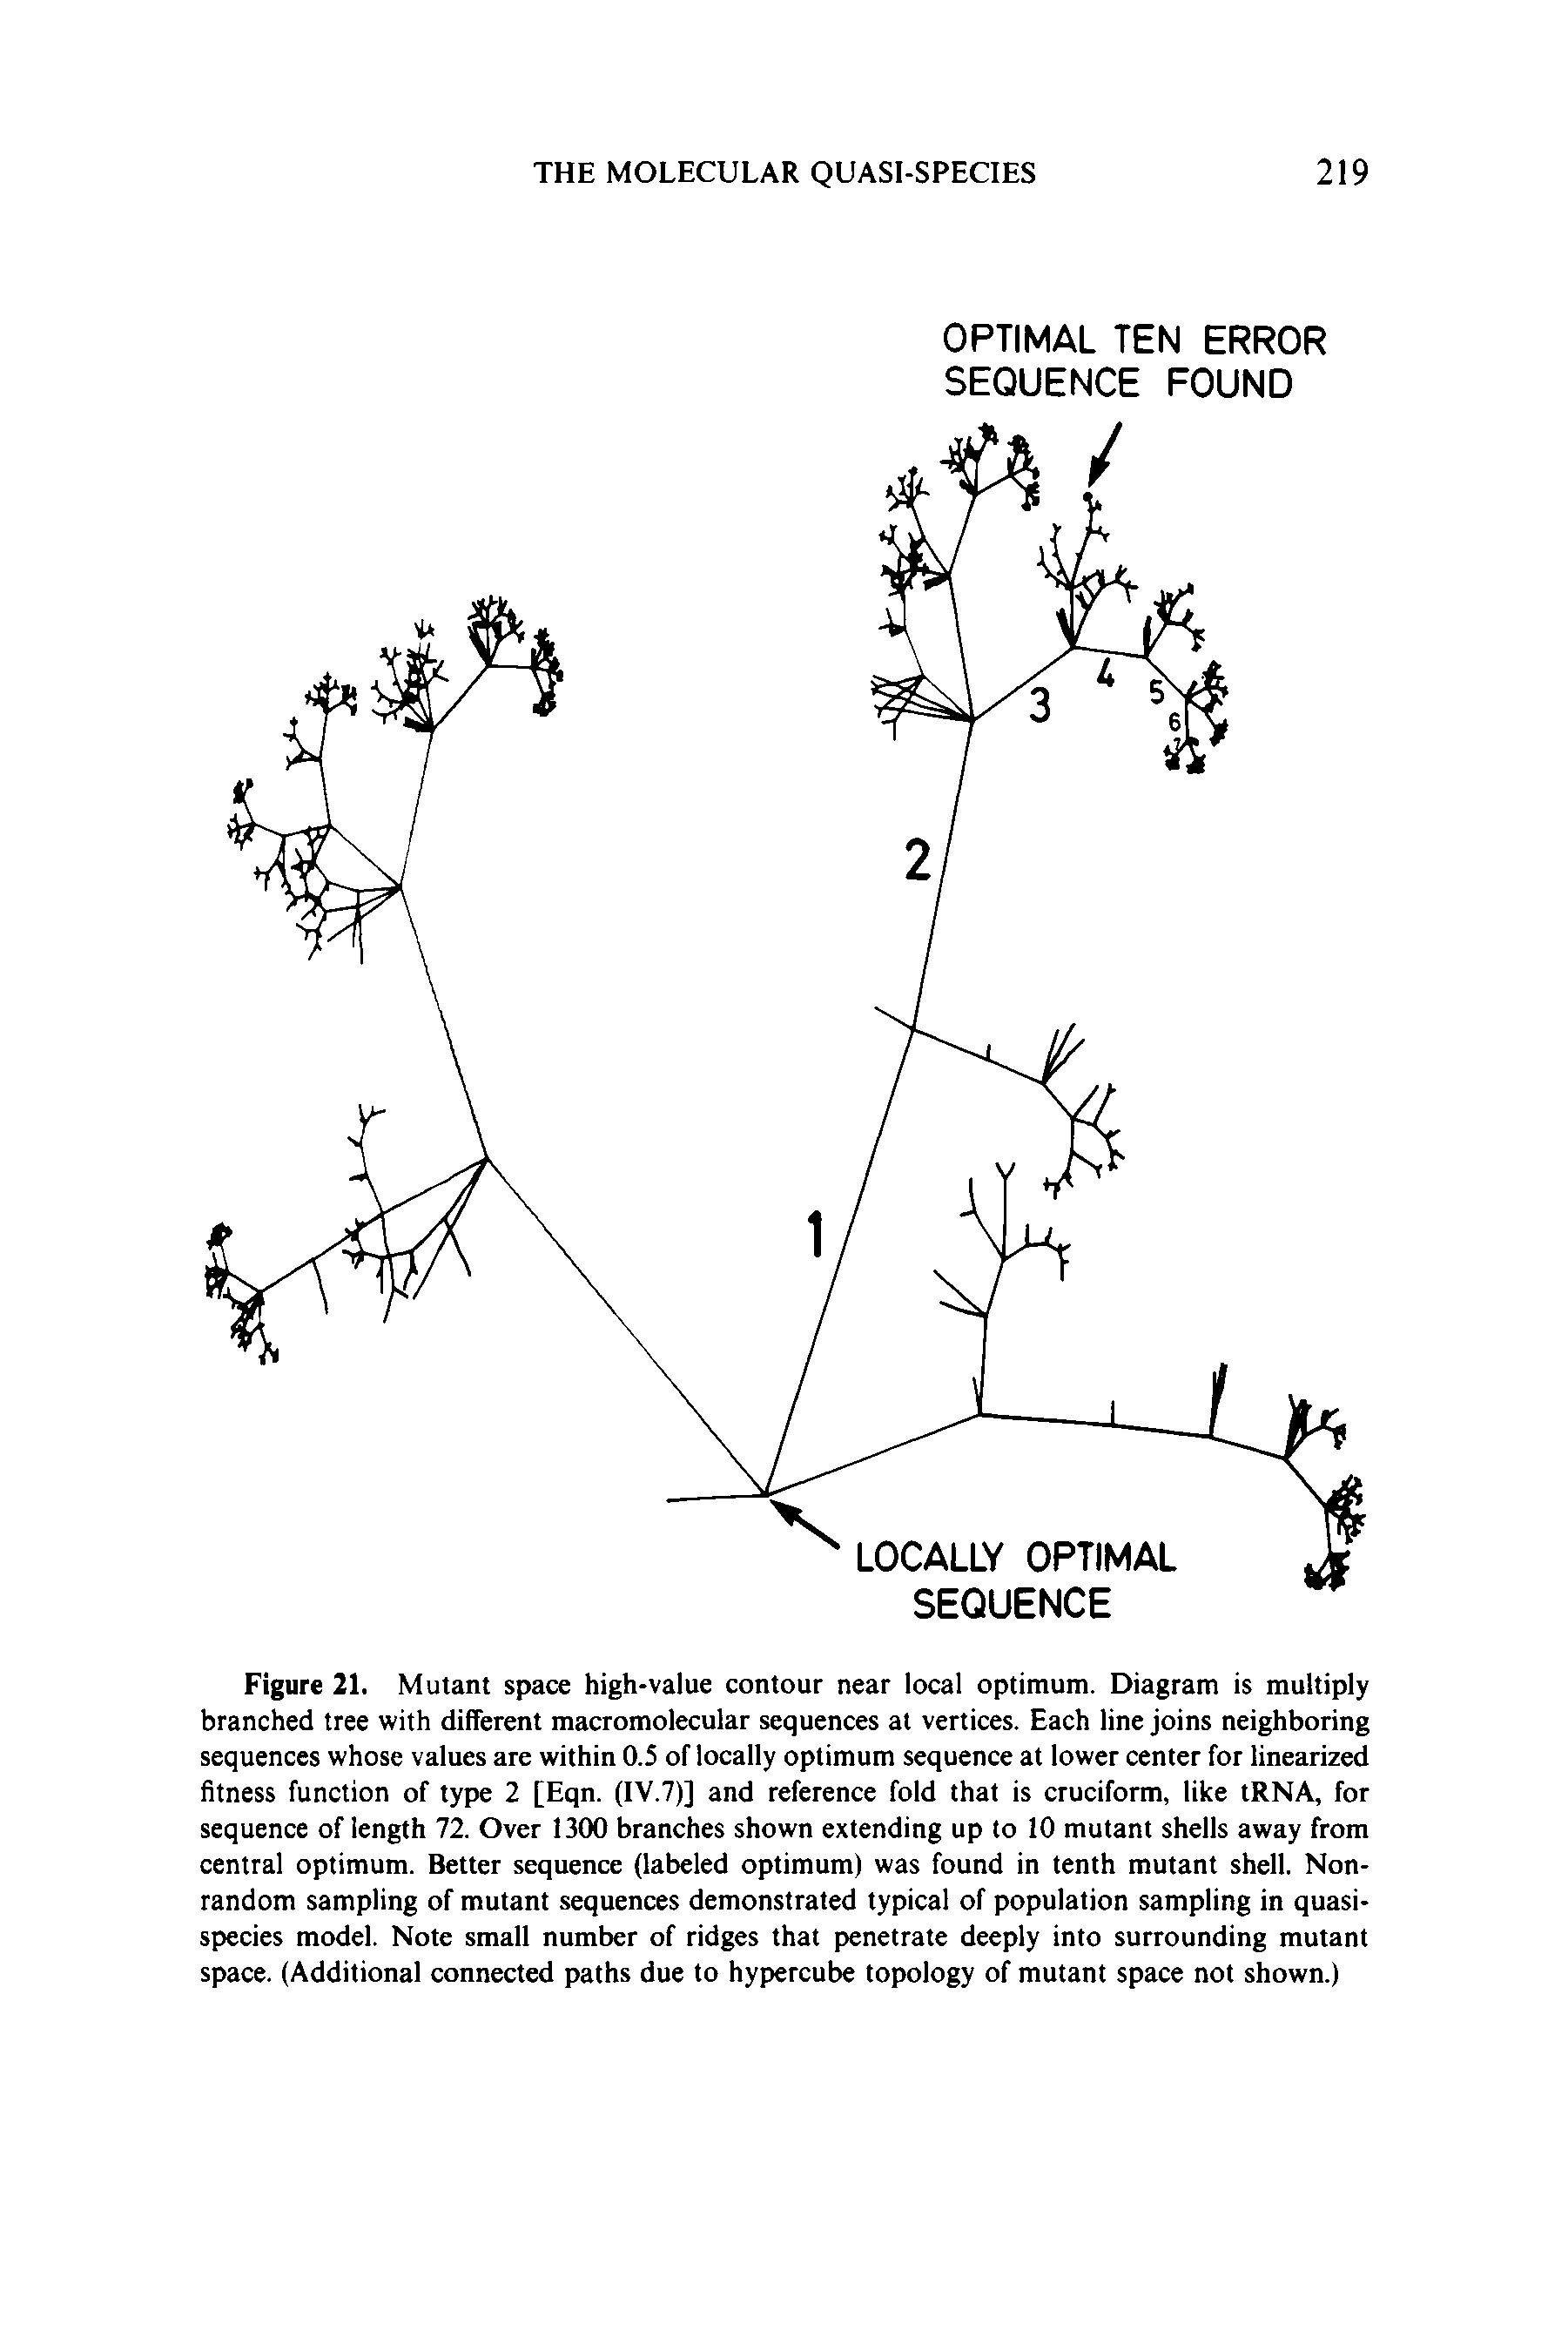 Figure 21. Mutant space high-value contour near local optimum. Diagram is multiply branched tree with different macromolecular sequences at vertices. Each line joins neighboring sequences whose values are within 0.5 of locally optimum sequence at lower center for linearized fitness function of type 2 [Eqn. (IV.7)] and reference fold that is cruciform, like tRNA, for sequence of length 72. Over 1300 branches shown extending up to 10 mutant shells away from central optimum. Better sequence (labeled optimum) was found in tenth mutant shell. Non-random sampling of mutant sequences demonstrated typical of population sampling in quasispecies model. Note small number of ridges that penetrate deeply into surrounding mutant space. (Additional connected paths due to hypercube topology of mutant space not shown.)...